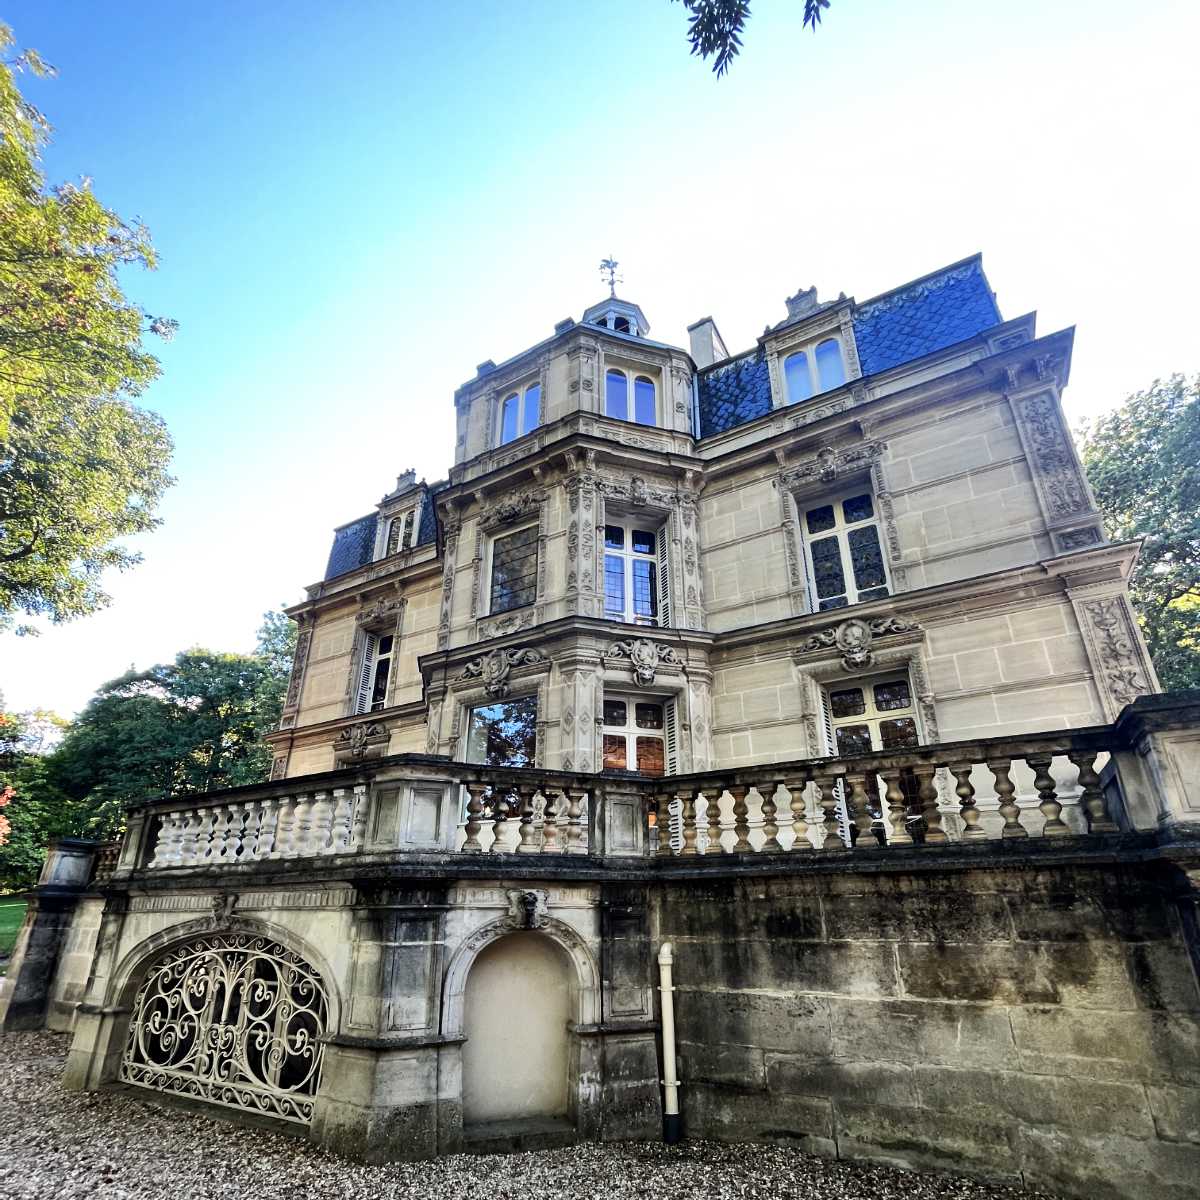 You are currently viewing Château de Monte Cristo: the Home of Alexandre Dumas